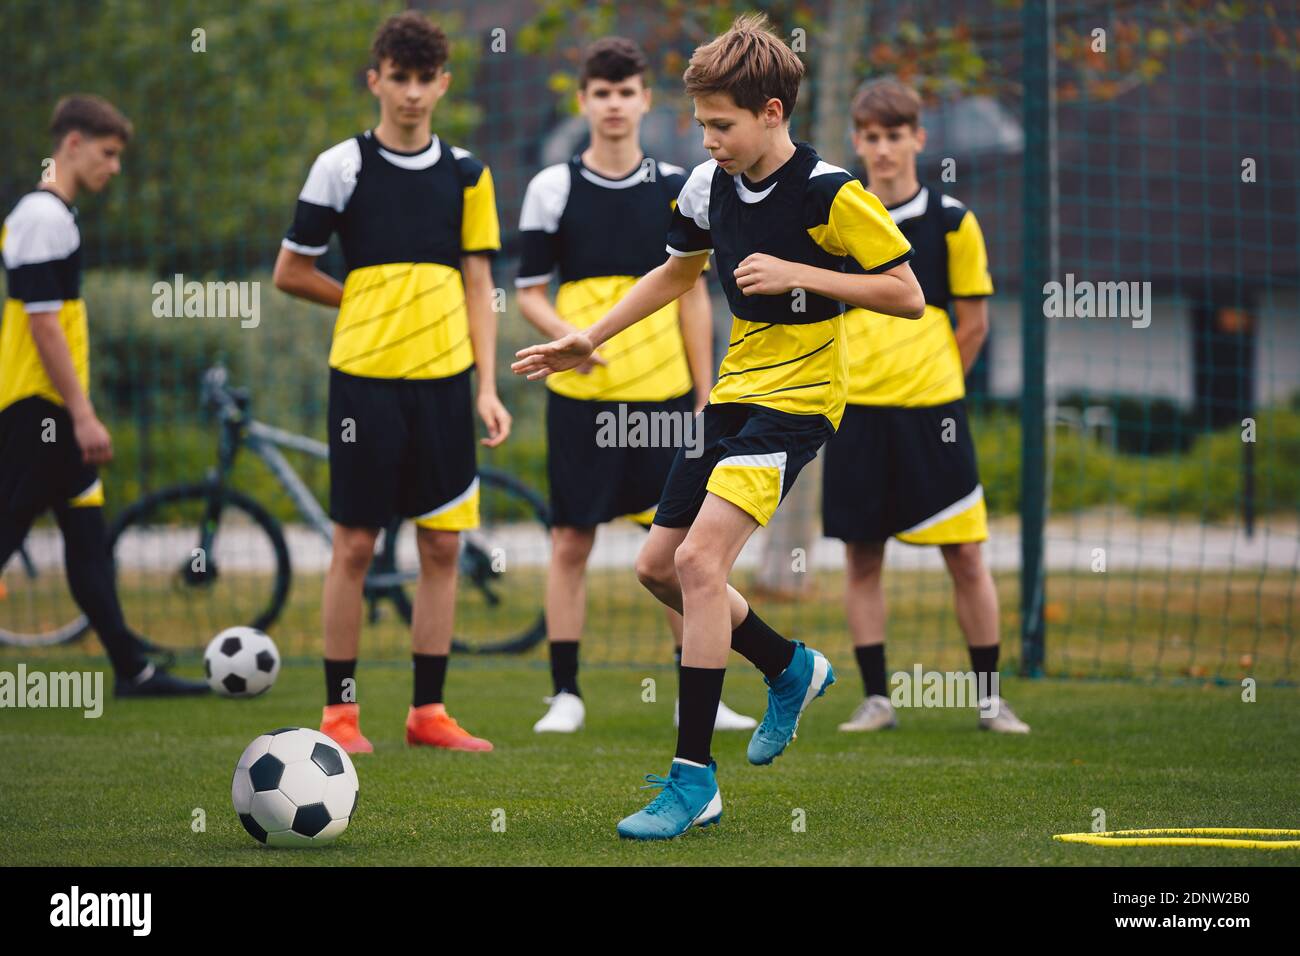 Group of teenage boys on football training. Young soccer players kicking ball on practice. School age boys improving sports skills on school training Stock Photo